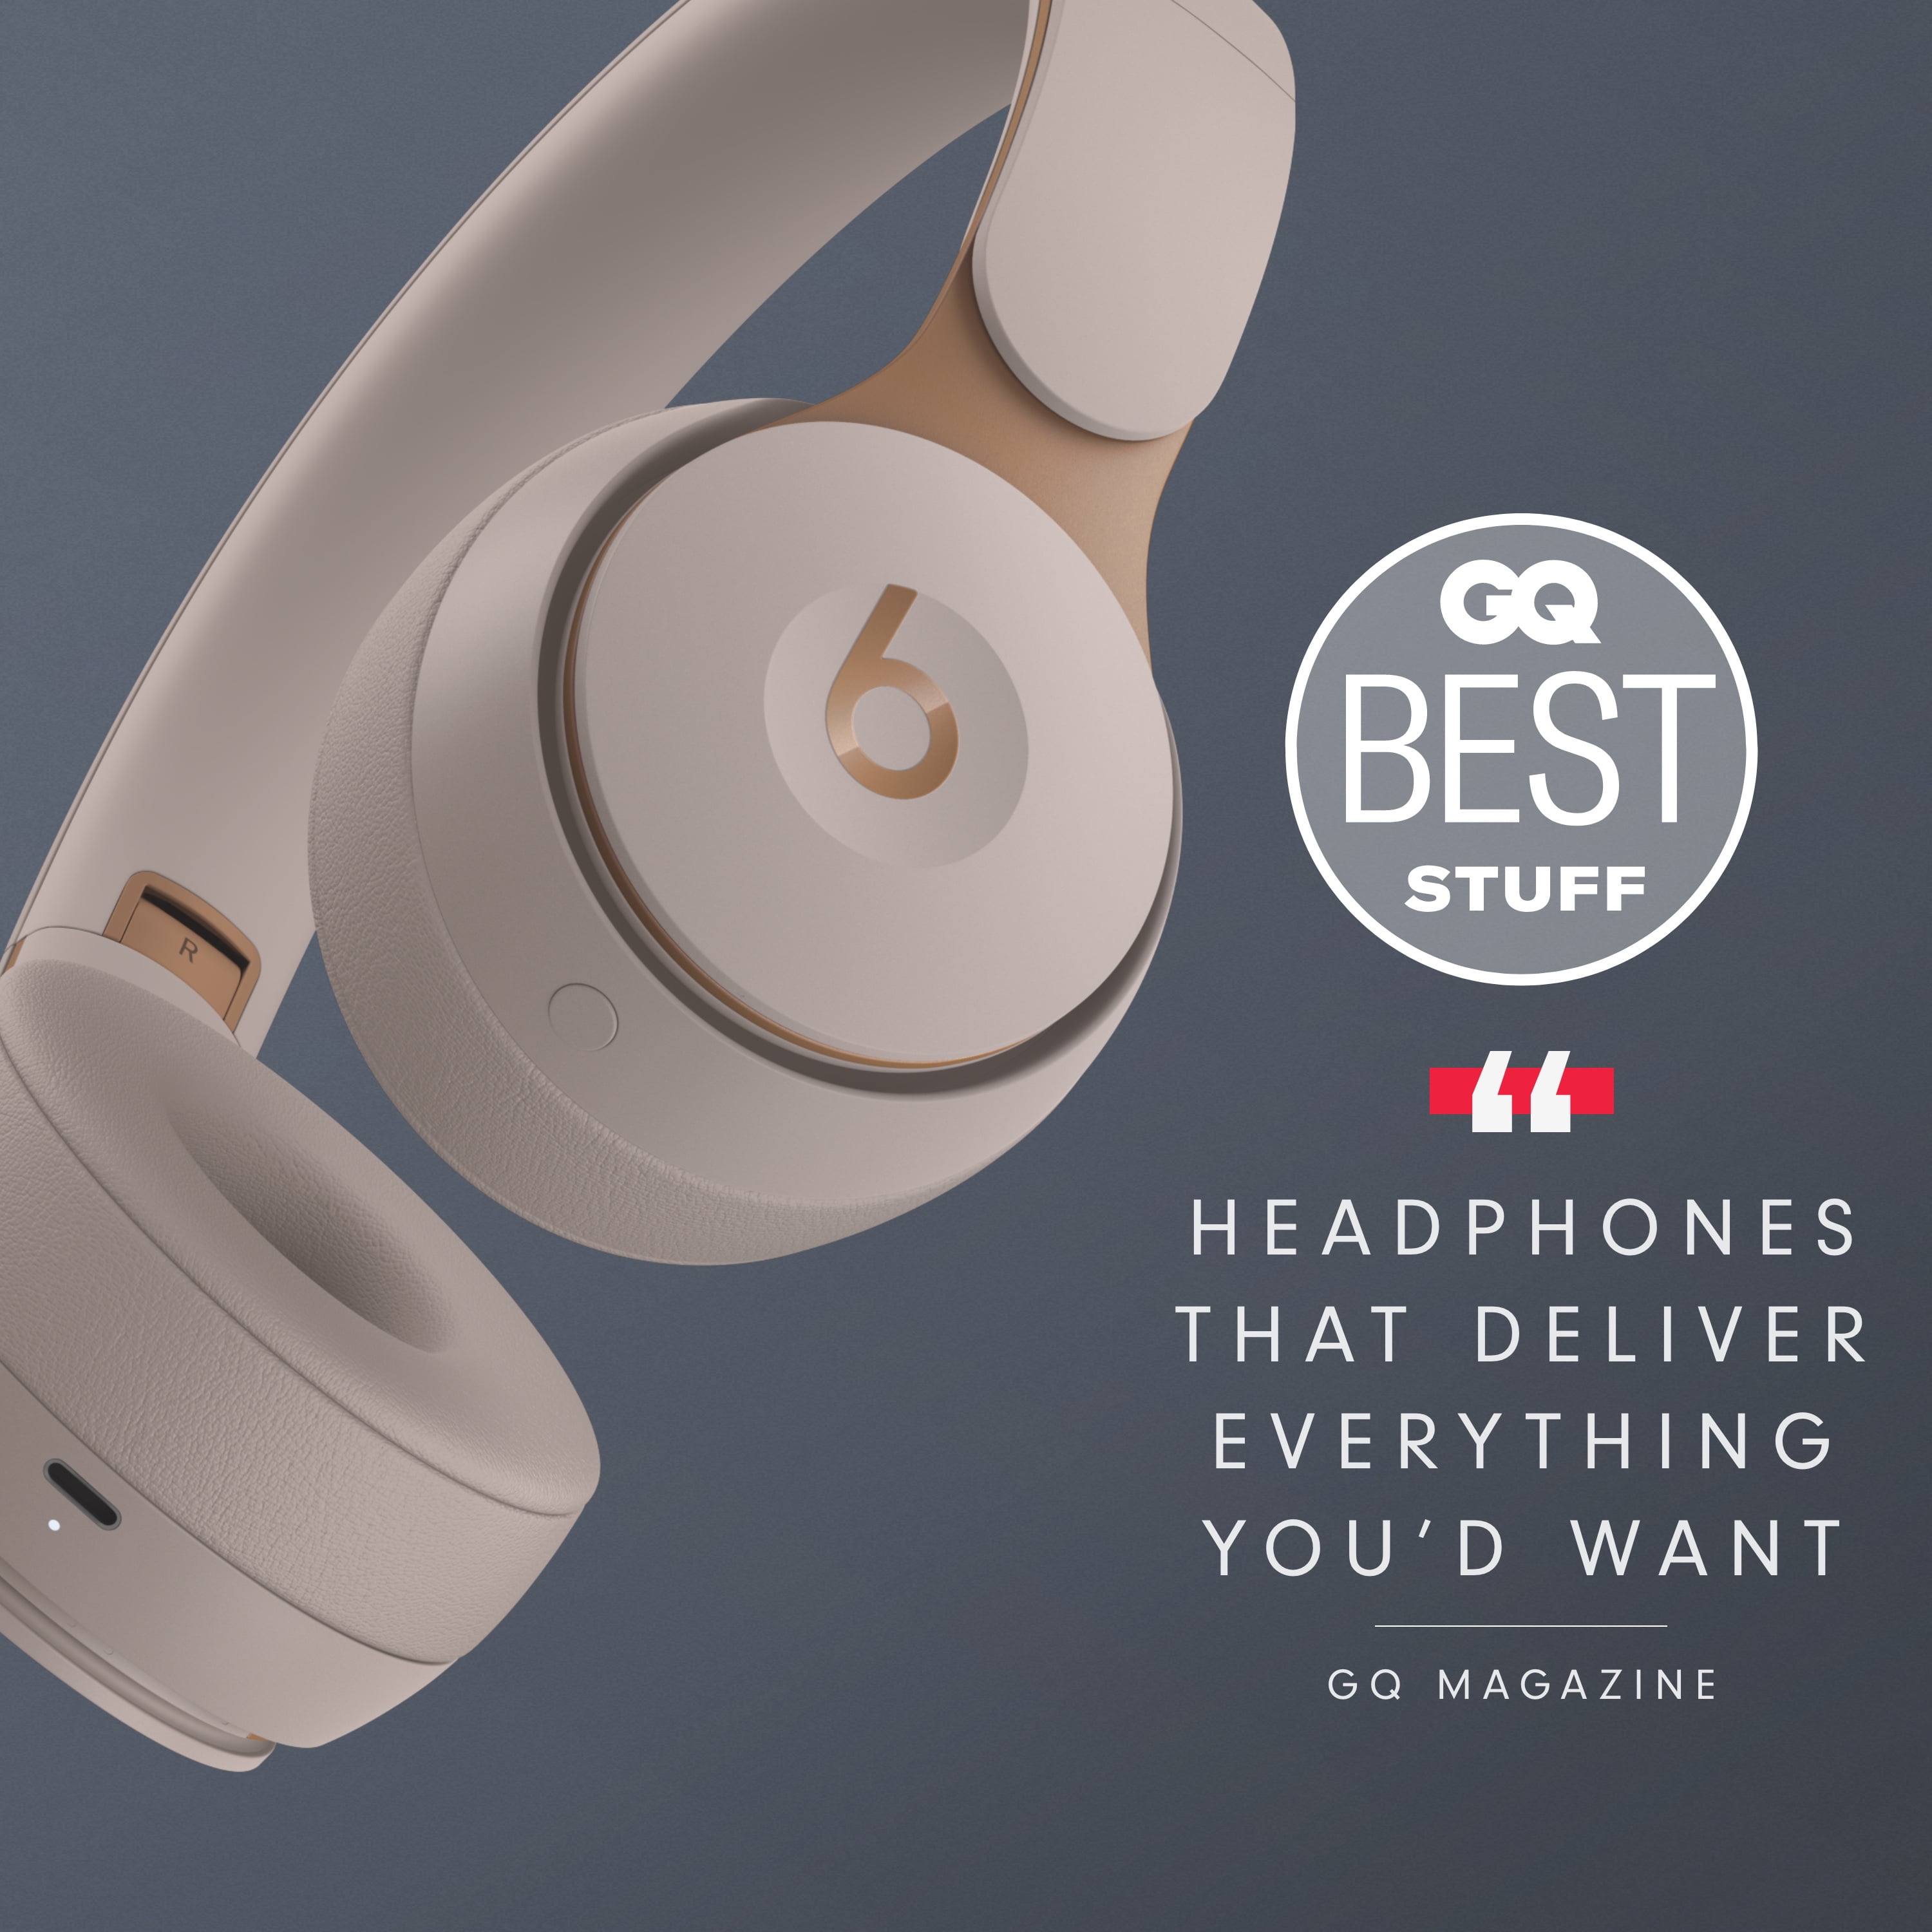 Beats Solo Pro Wireless Noise Cancelling On-Ear Headphones with Apple H1  Headphone Chip - Grey